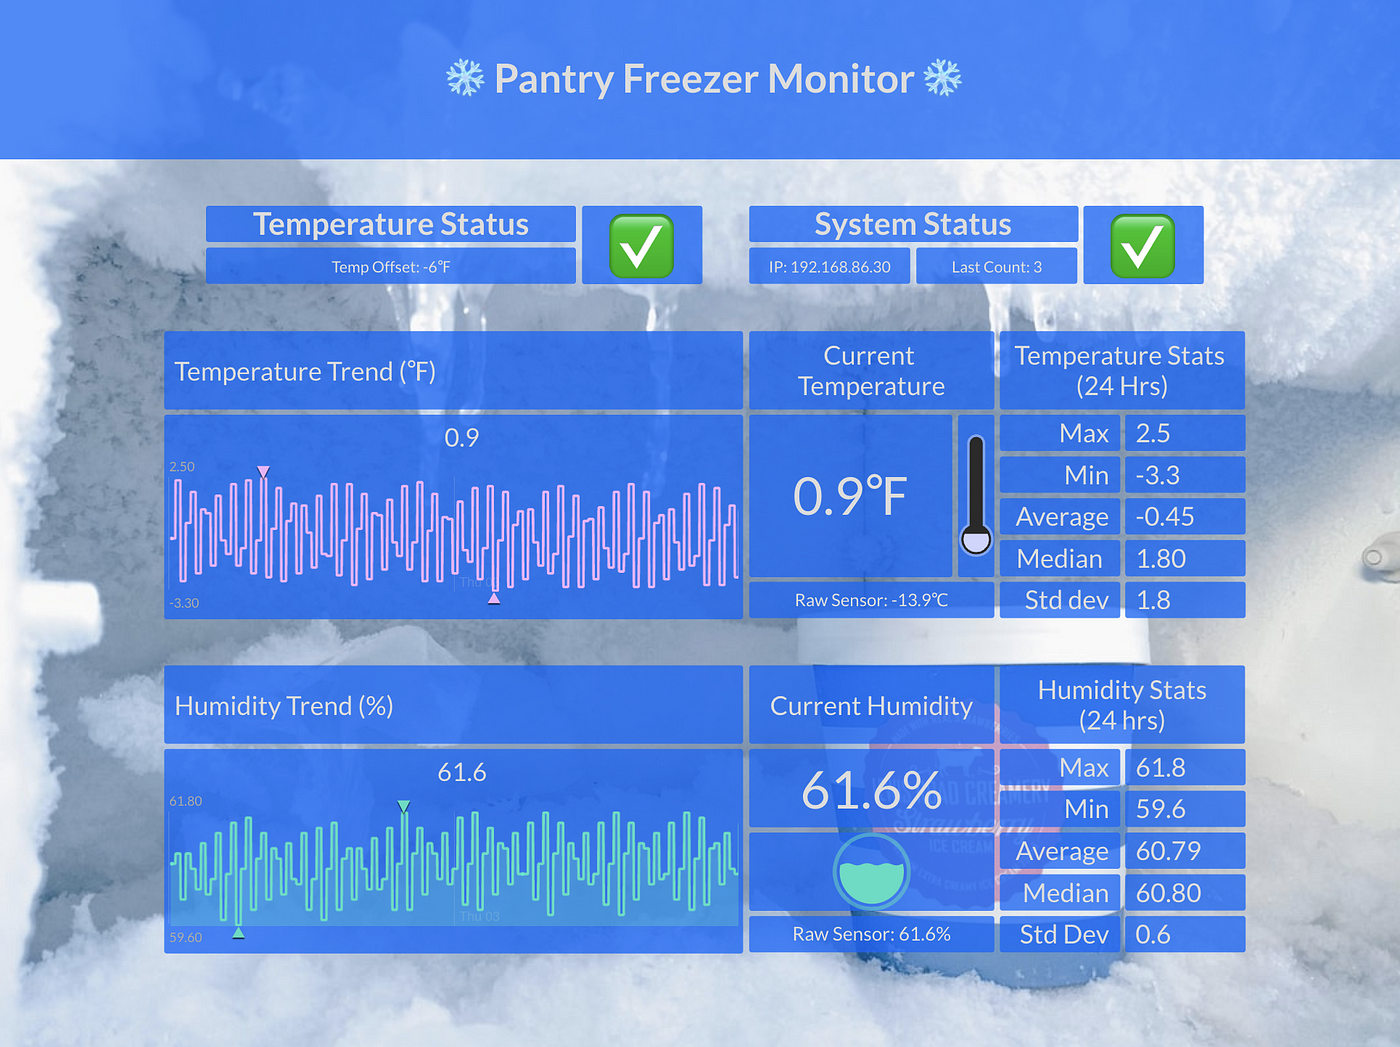 Temperature Probe for Freezer and Refrigerator Monitoring